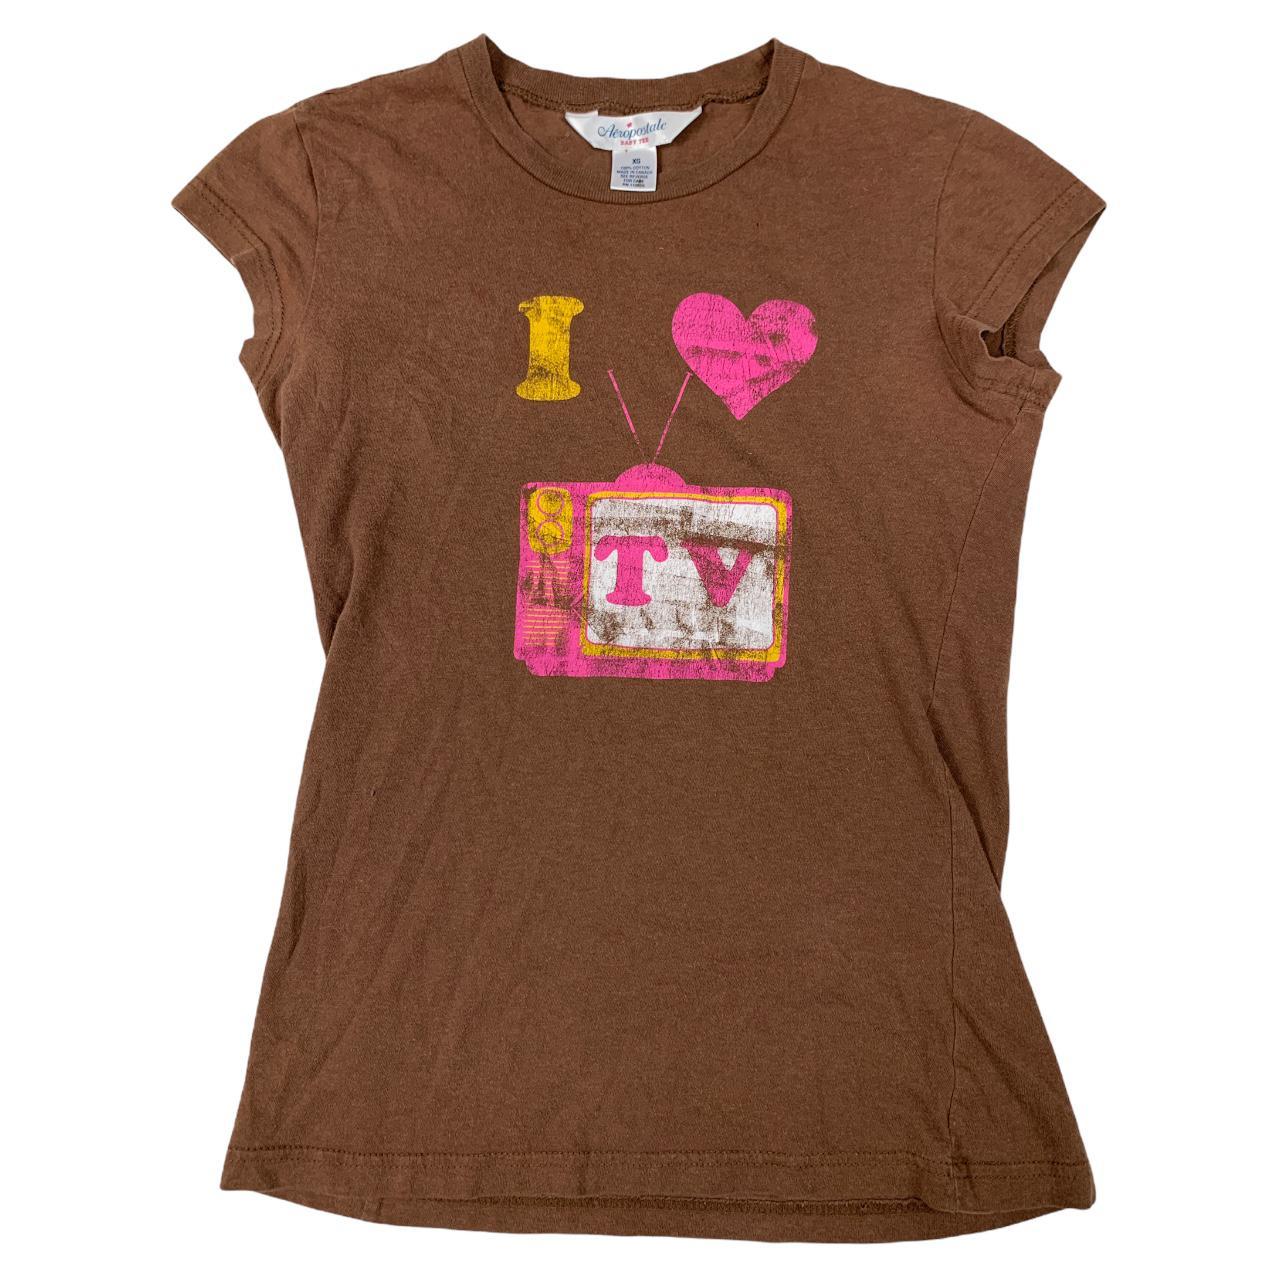 Product Image 1 - I HEART TV TEE

This y2k